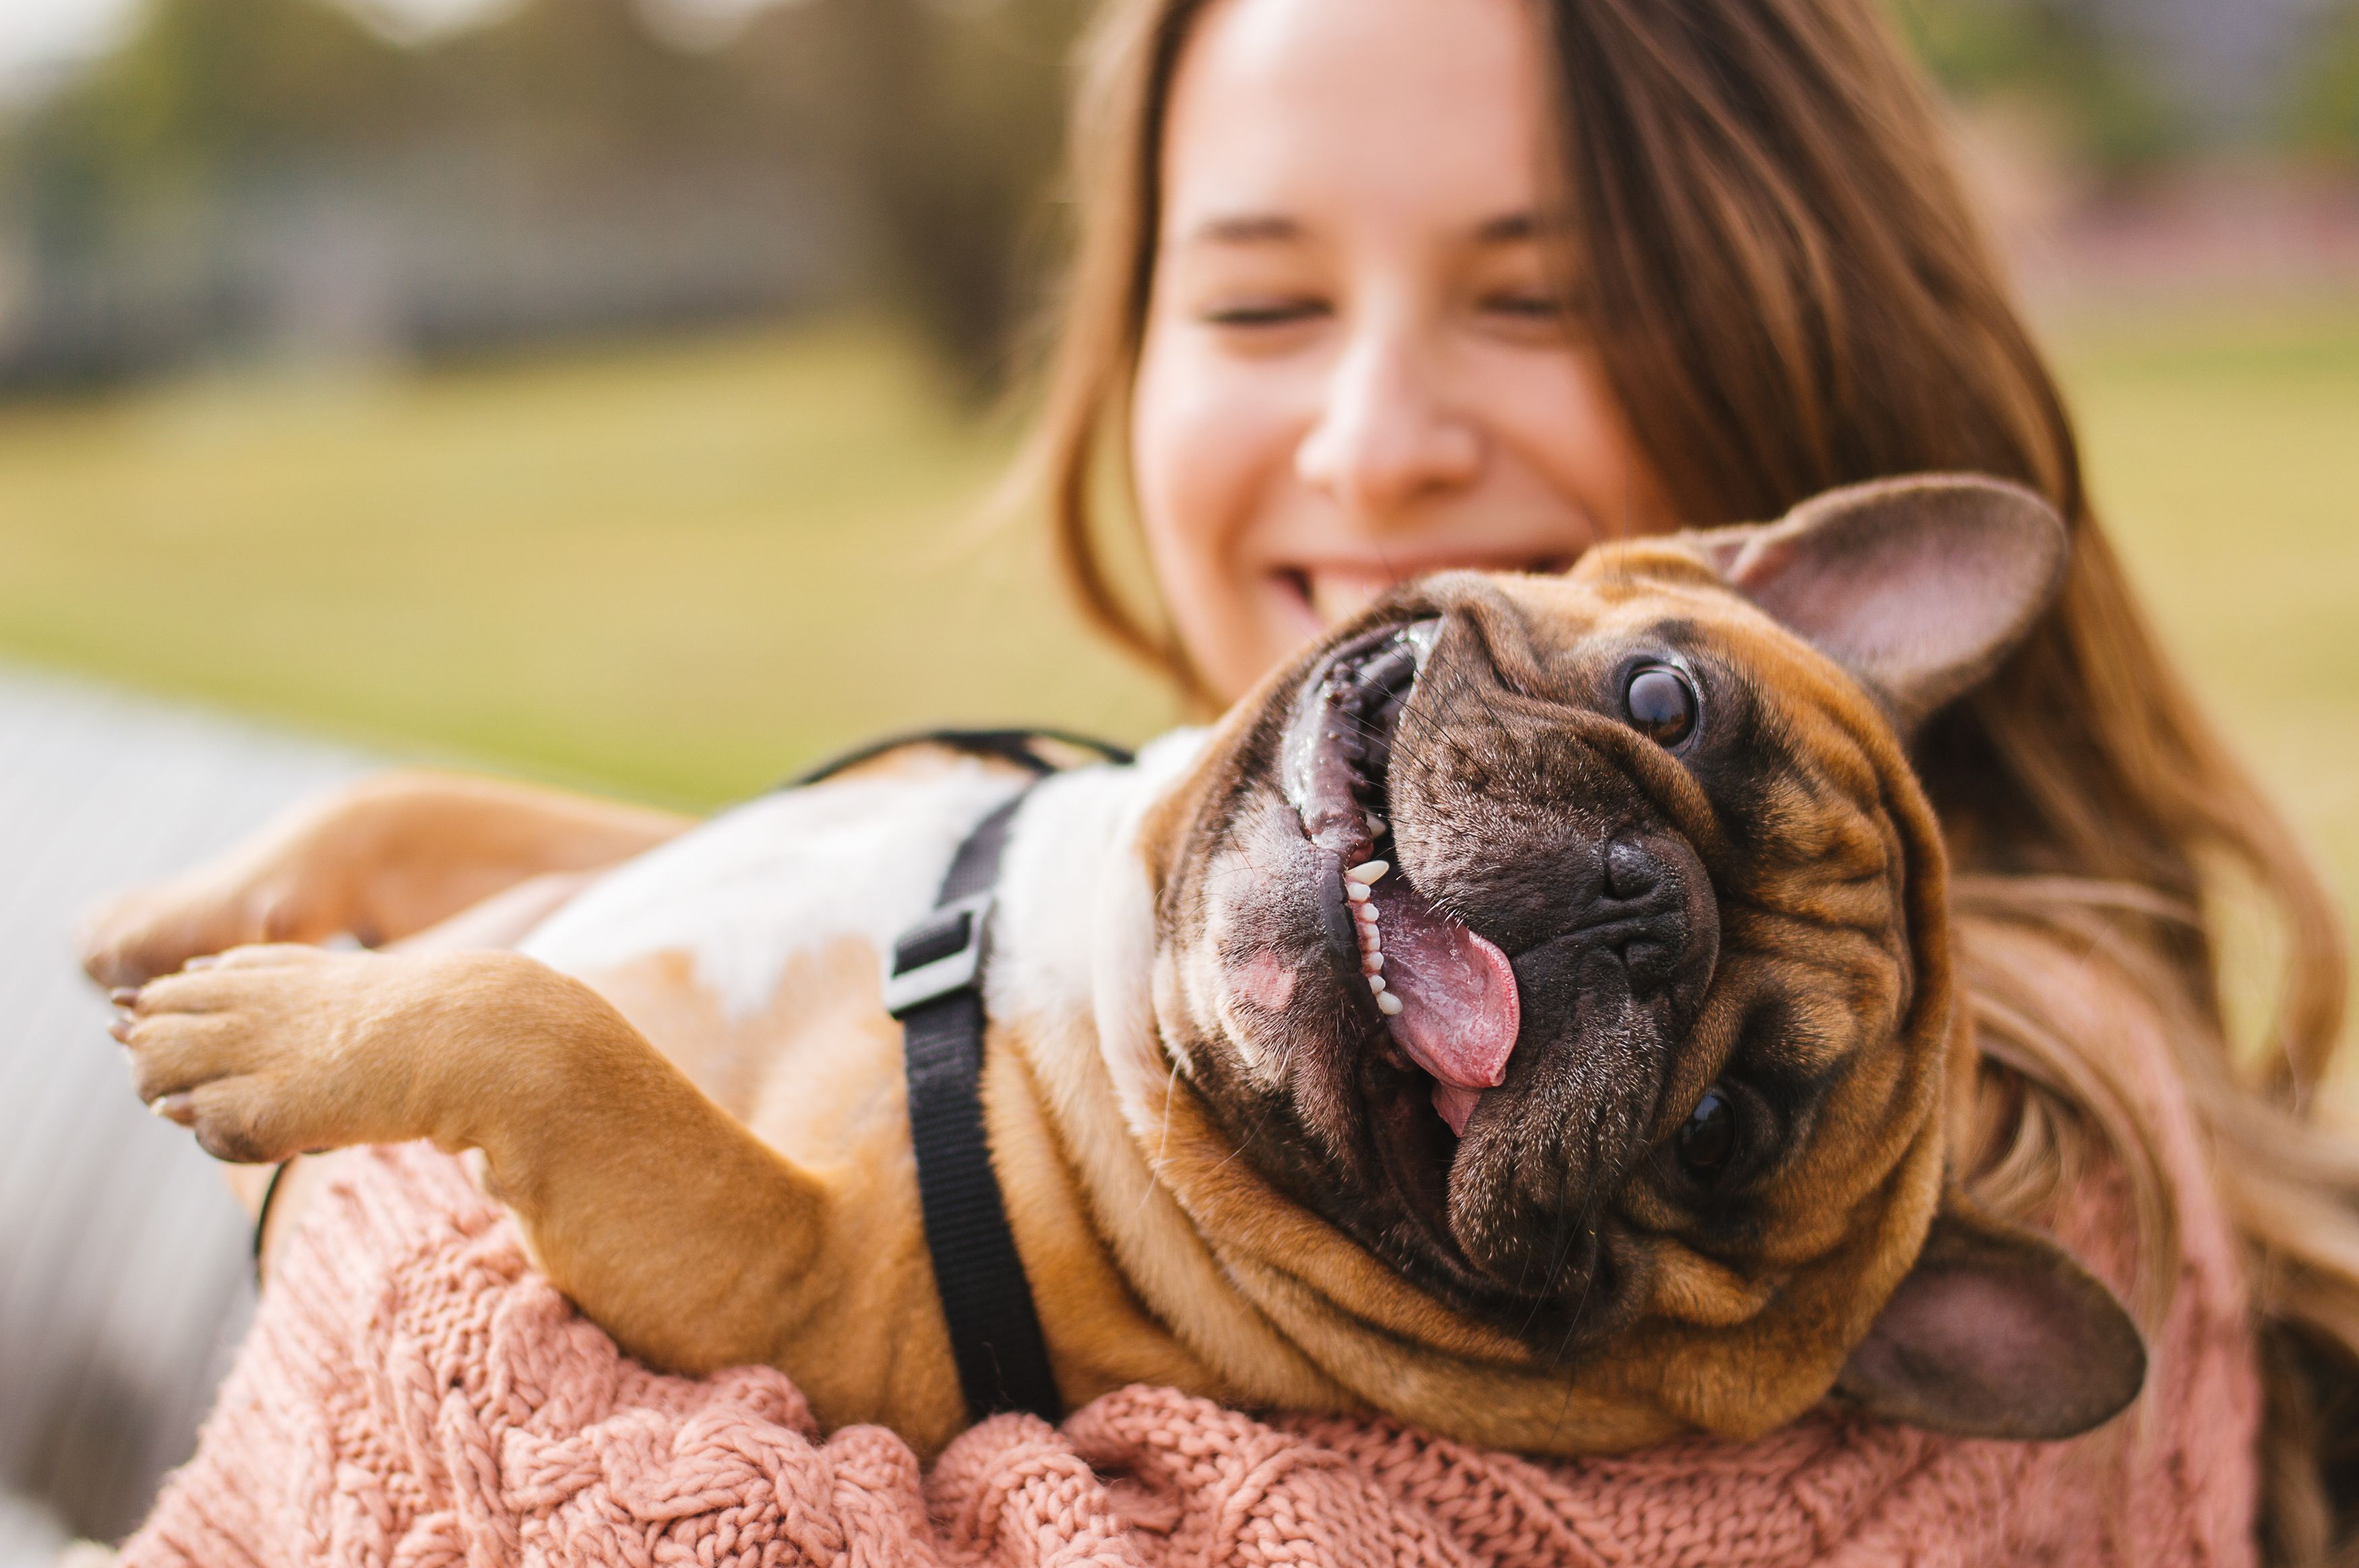 A happy dog captured in the hands of her owner. | Source: Shutterstock